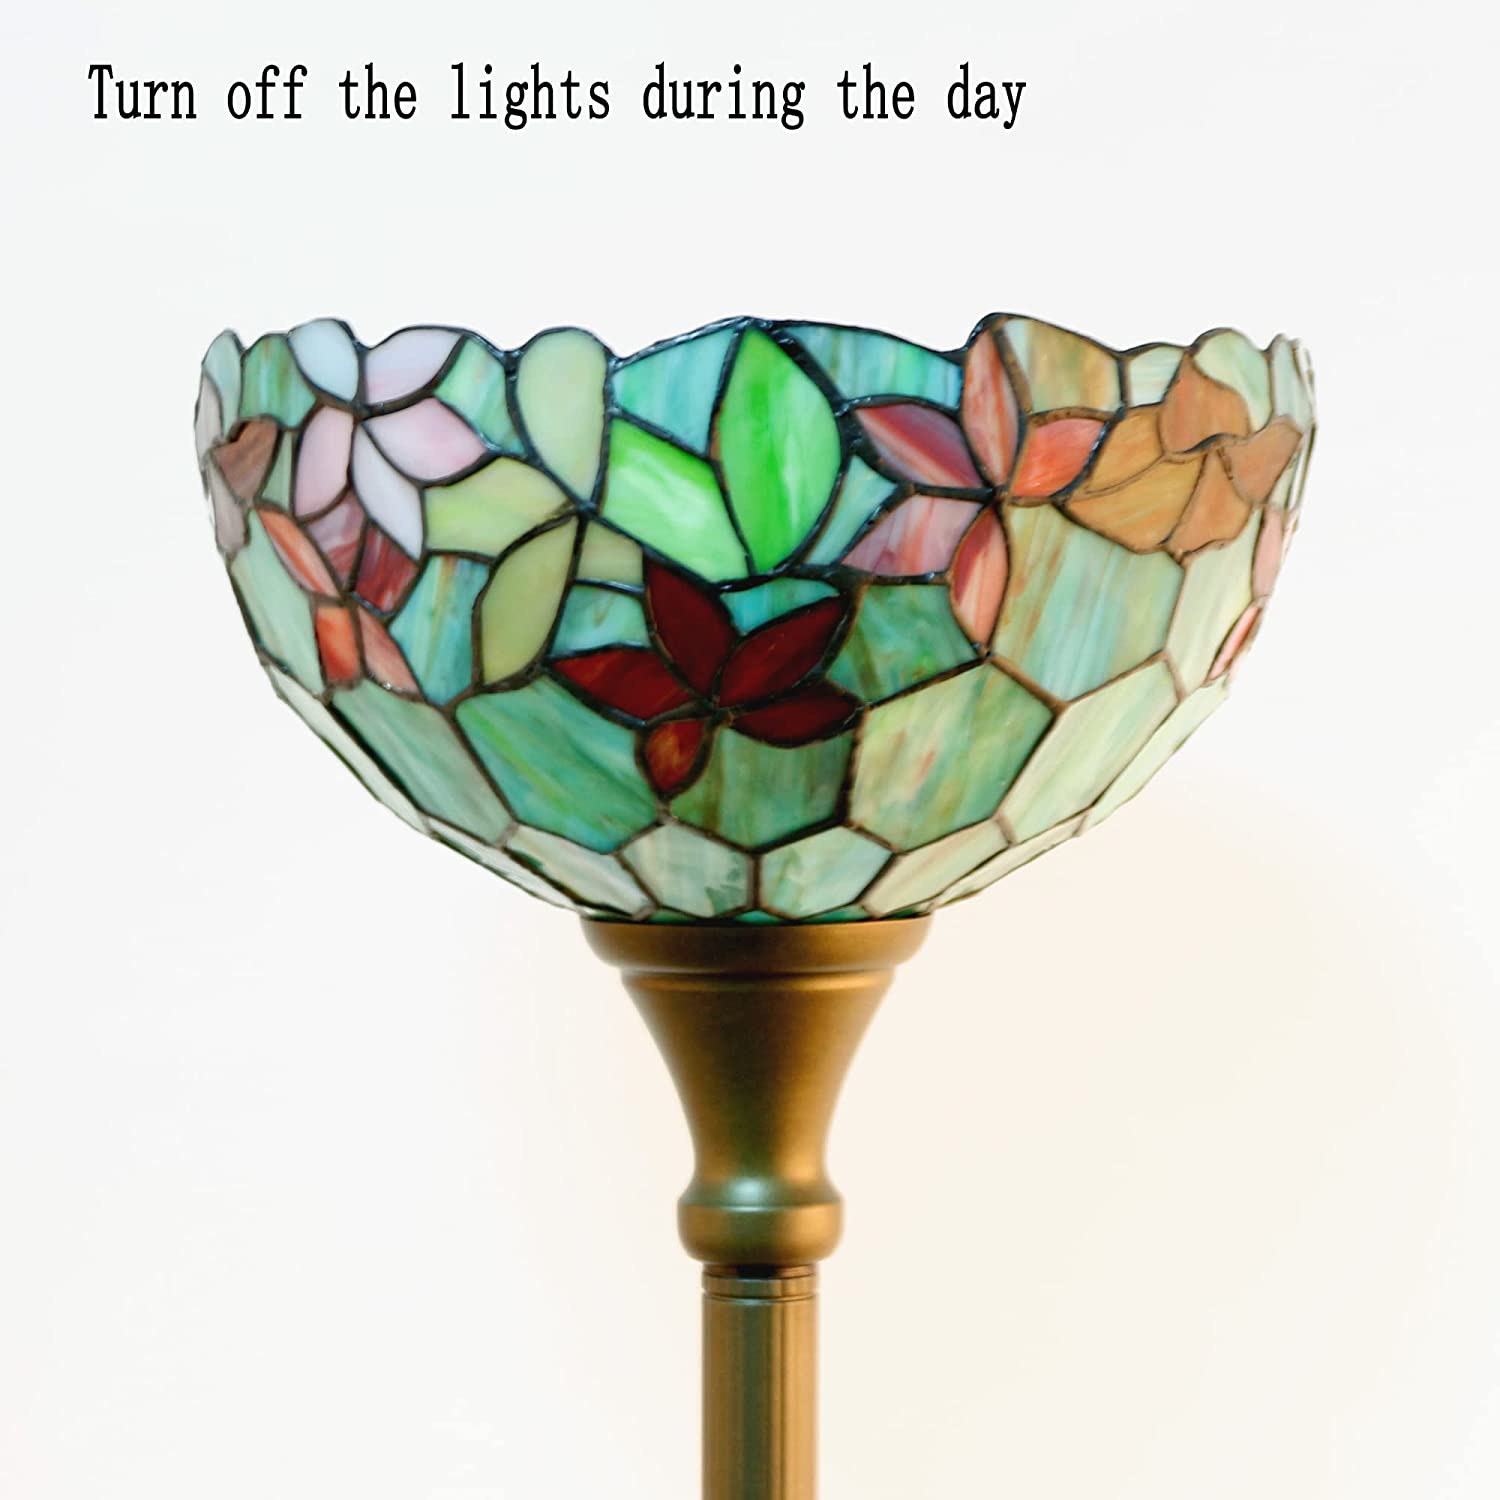 Werfactory® Torchiere Tiffany Floor Lamp 12X12X67 Inches Stained Glass Flower Standing Torch Light